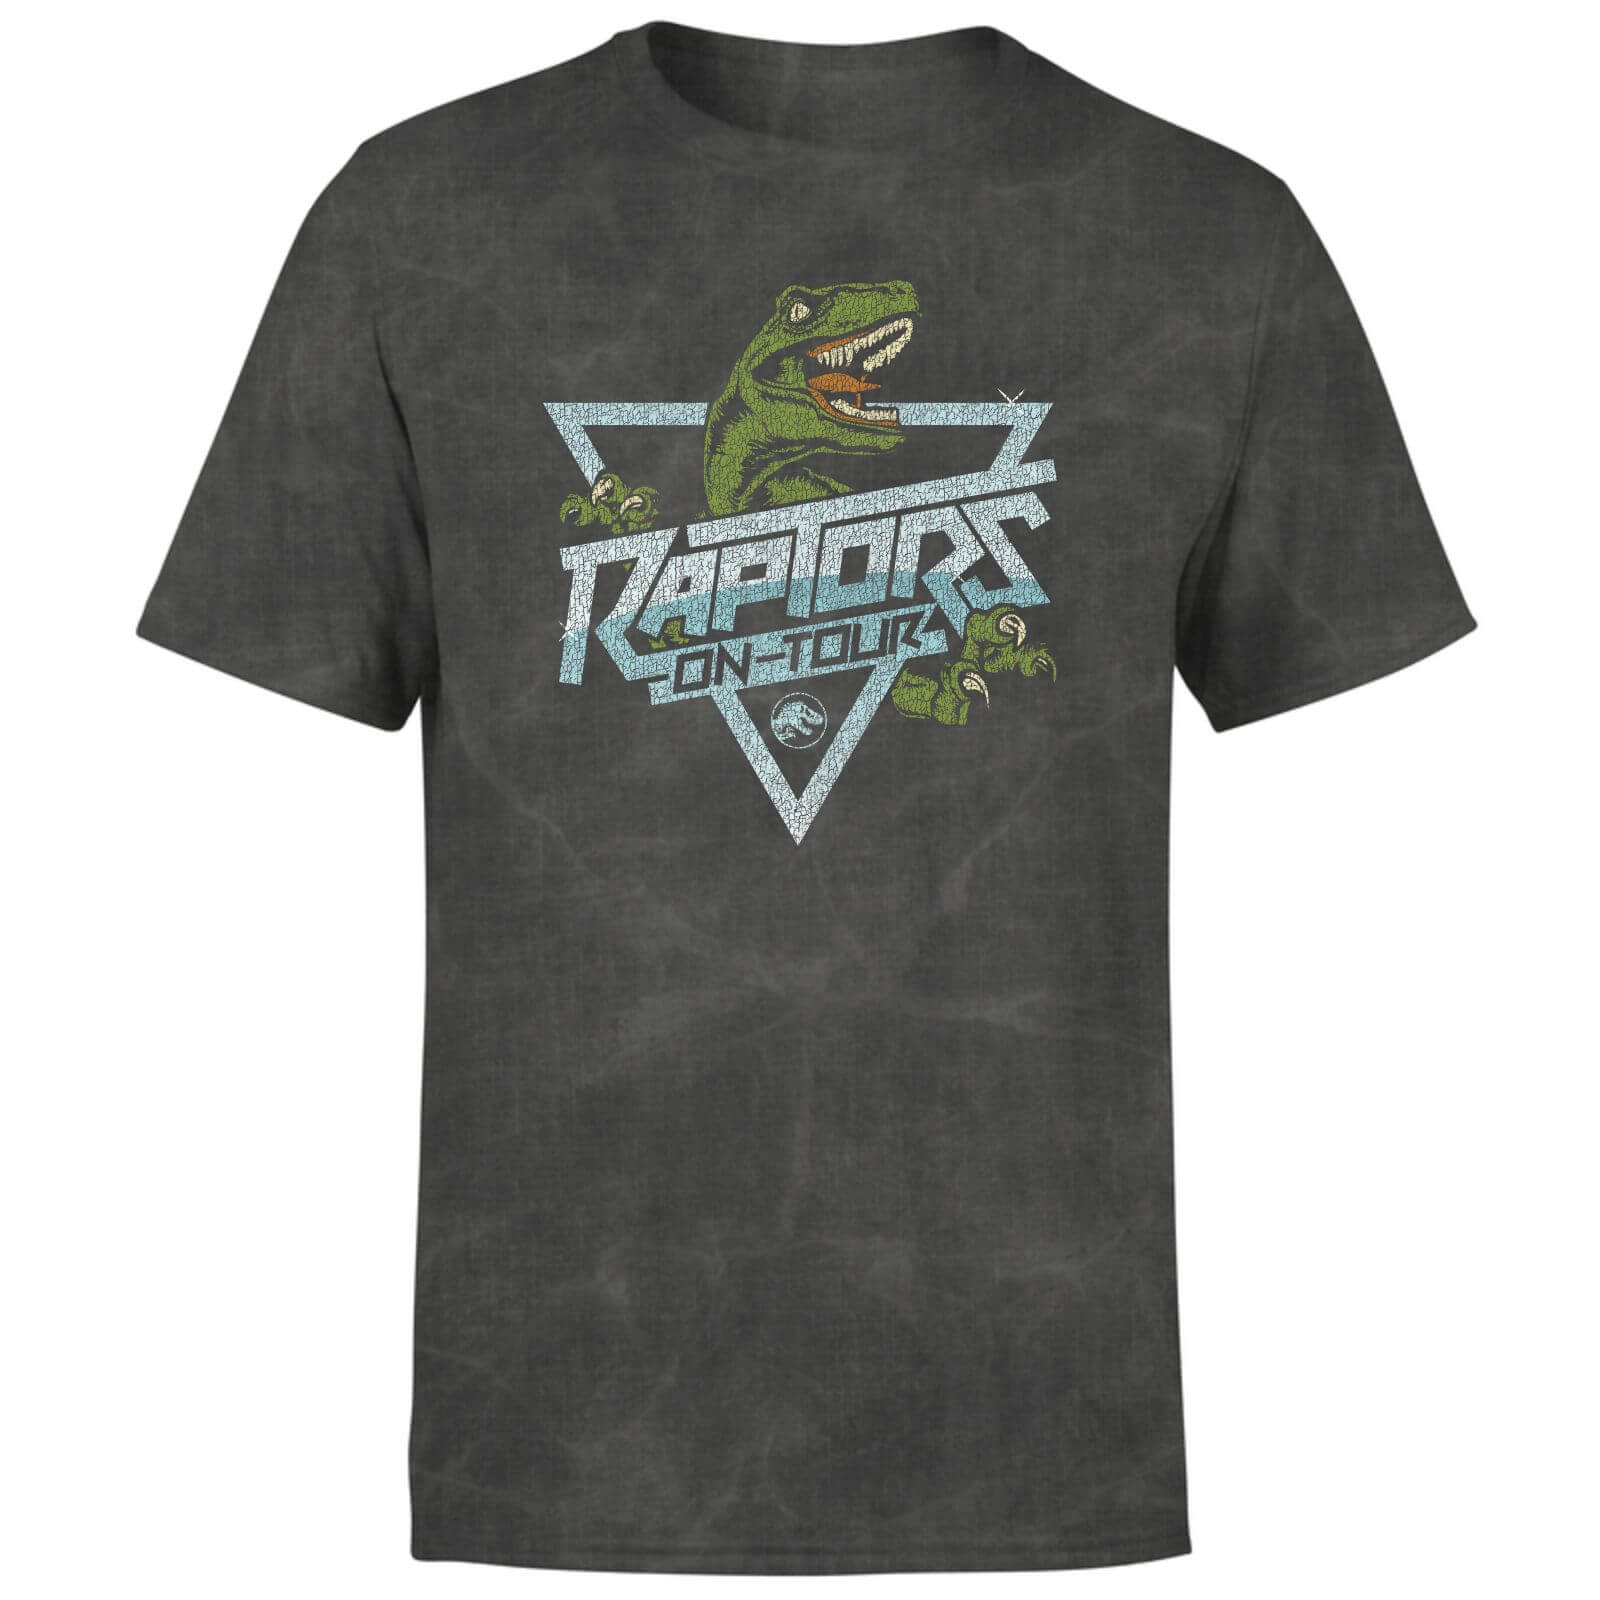 View the best prices for: jurassic park raptors on tour unisex t-shirt